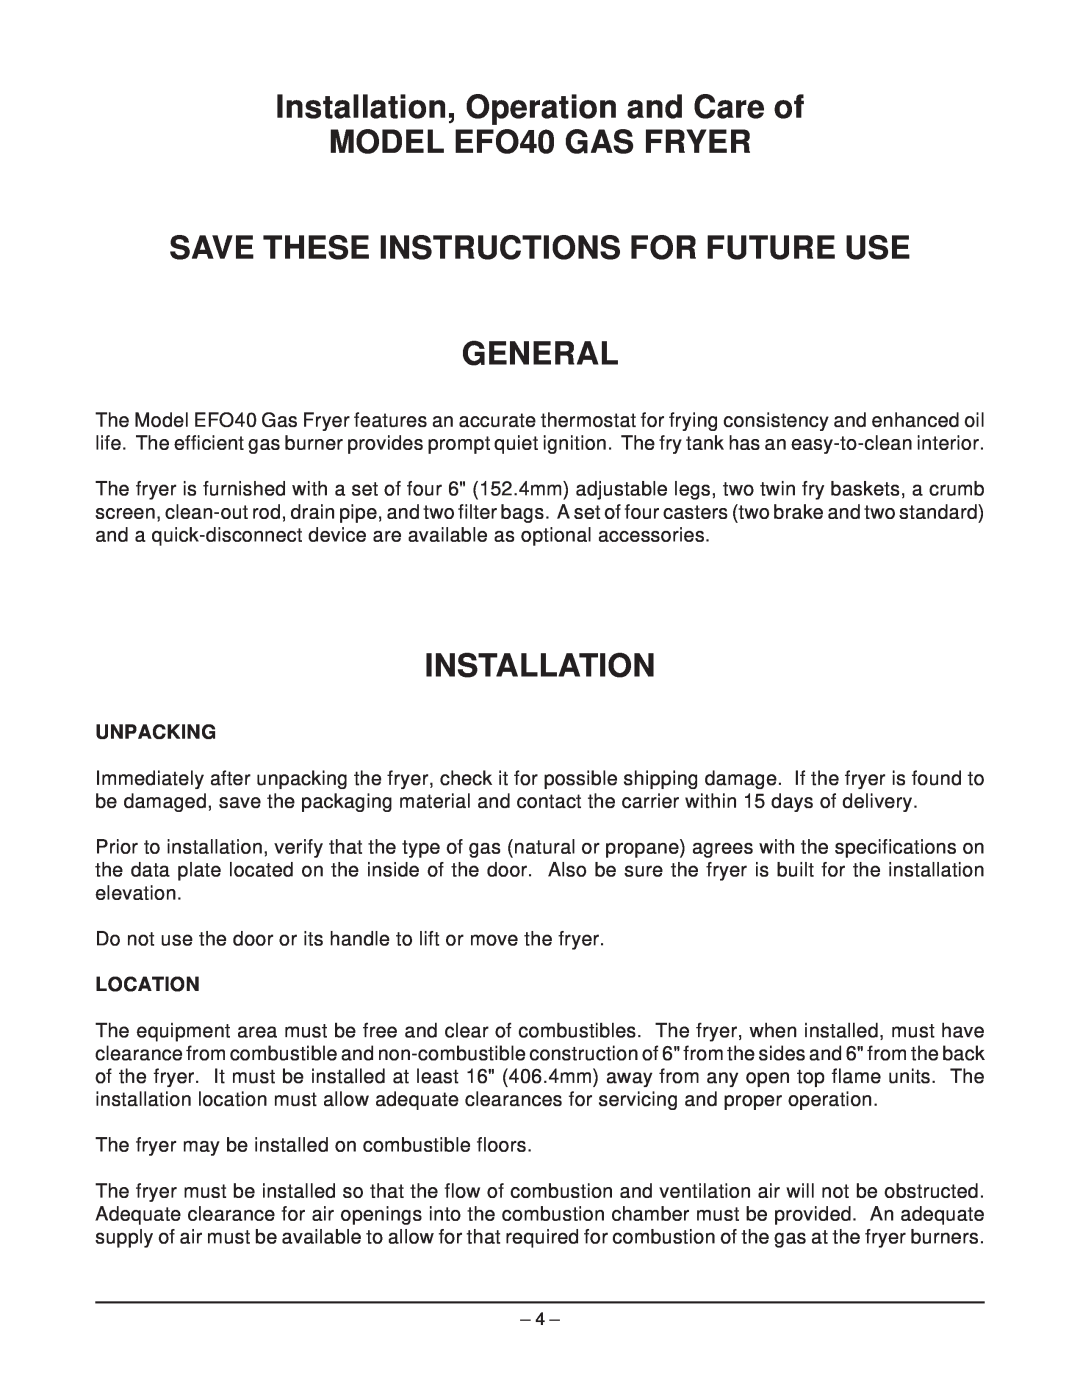 Hobart manual Installation, Operation and Care of, MODEL EFO40 GAS FRYER, Save These Instructions For Future Use General 